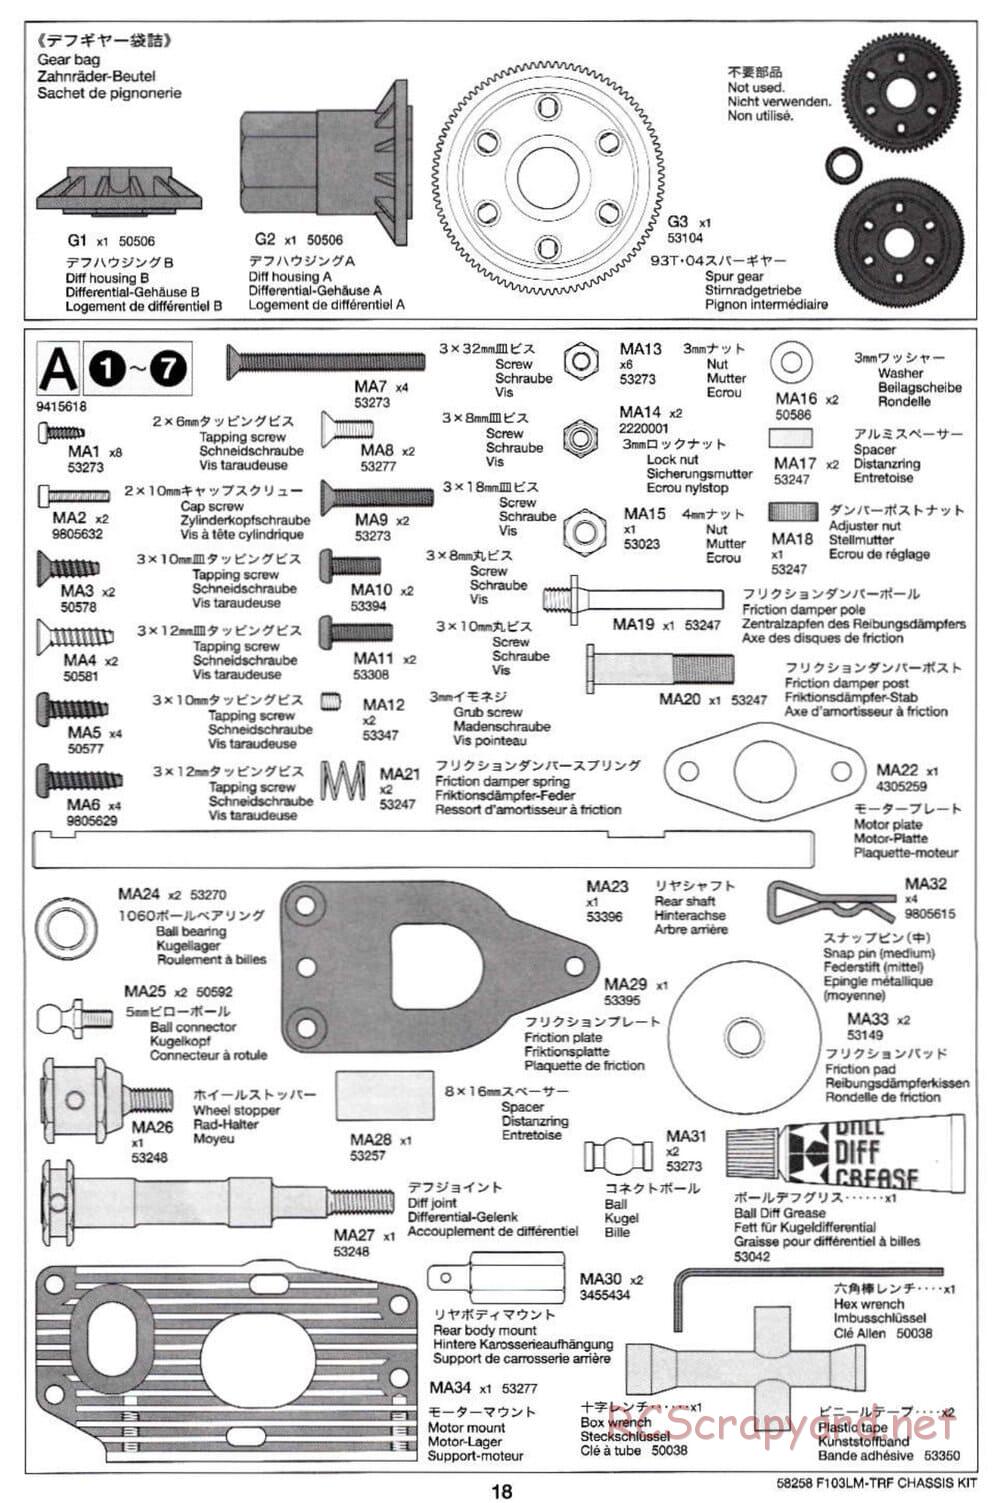 Tamiya - F103LM TRF Special Chassis - Manual - Page 18